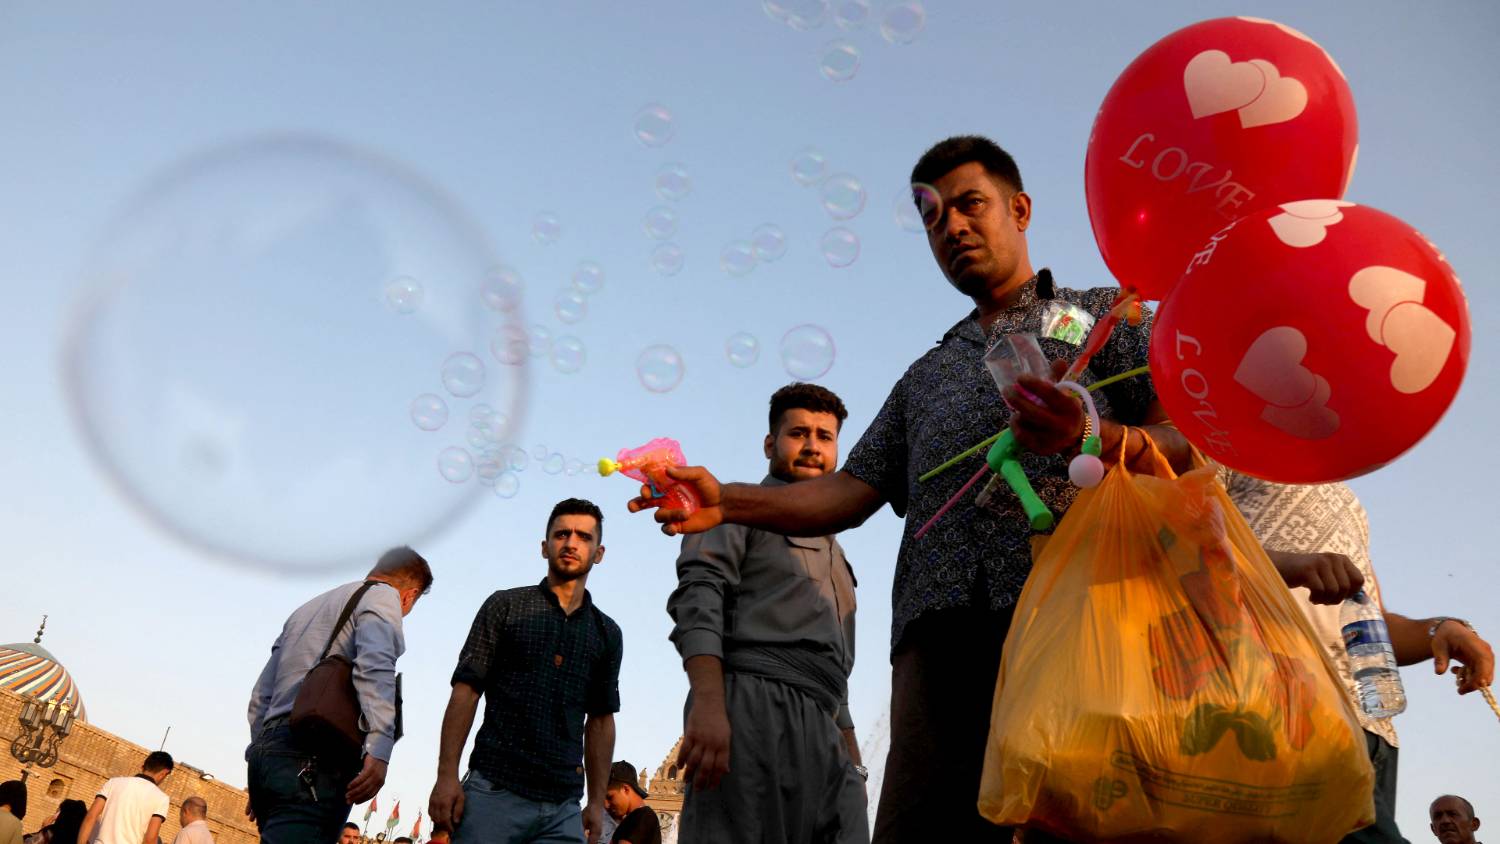 This man sells balloons and bubble blowers to children celebrating Eid in Irbil [Safin Hamed/AFP]